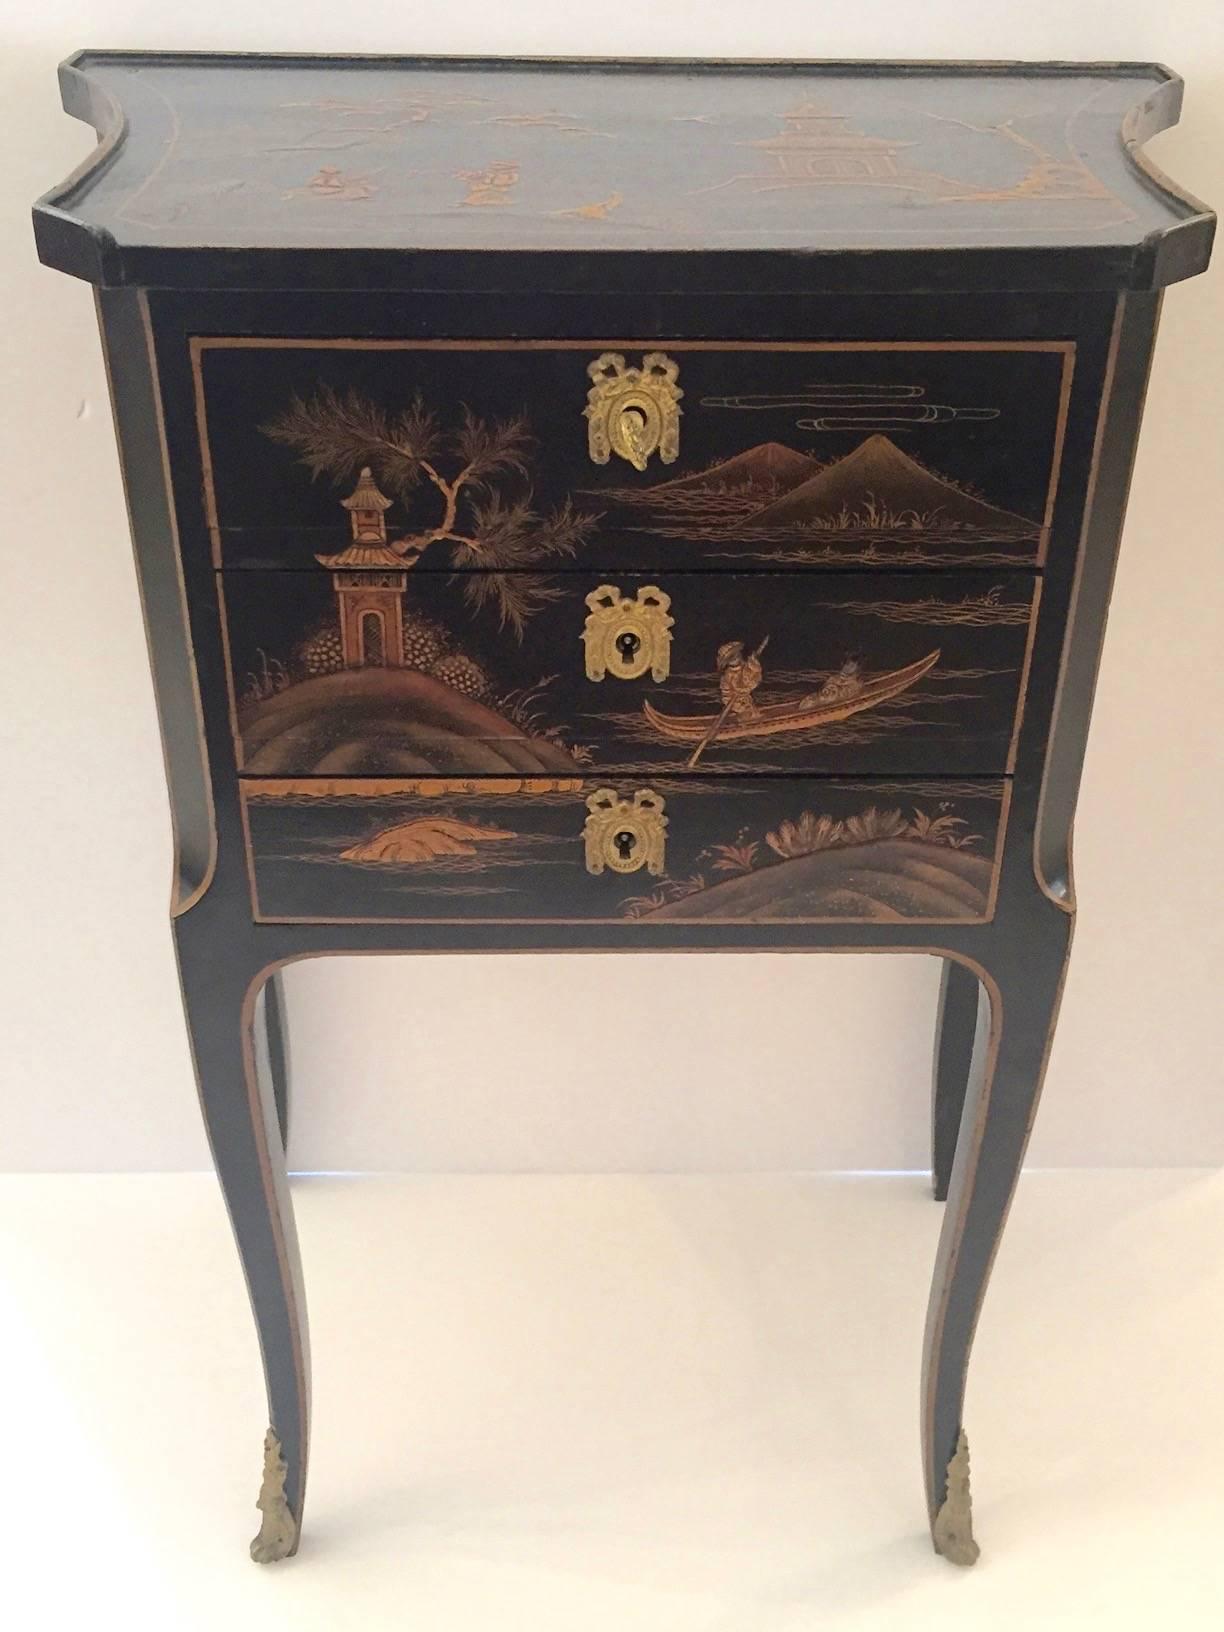 Fine Louis XVI French hand-painted chinoiserie nightstand/ side table/ small chest of drawers. Gorgeous ormolu keyholes and one key, sabre legs with bronze caps, refined workmanship including dovetailed drawers, painted back side, and meticulous